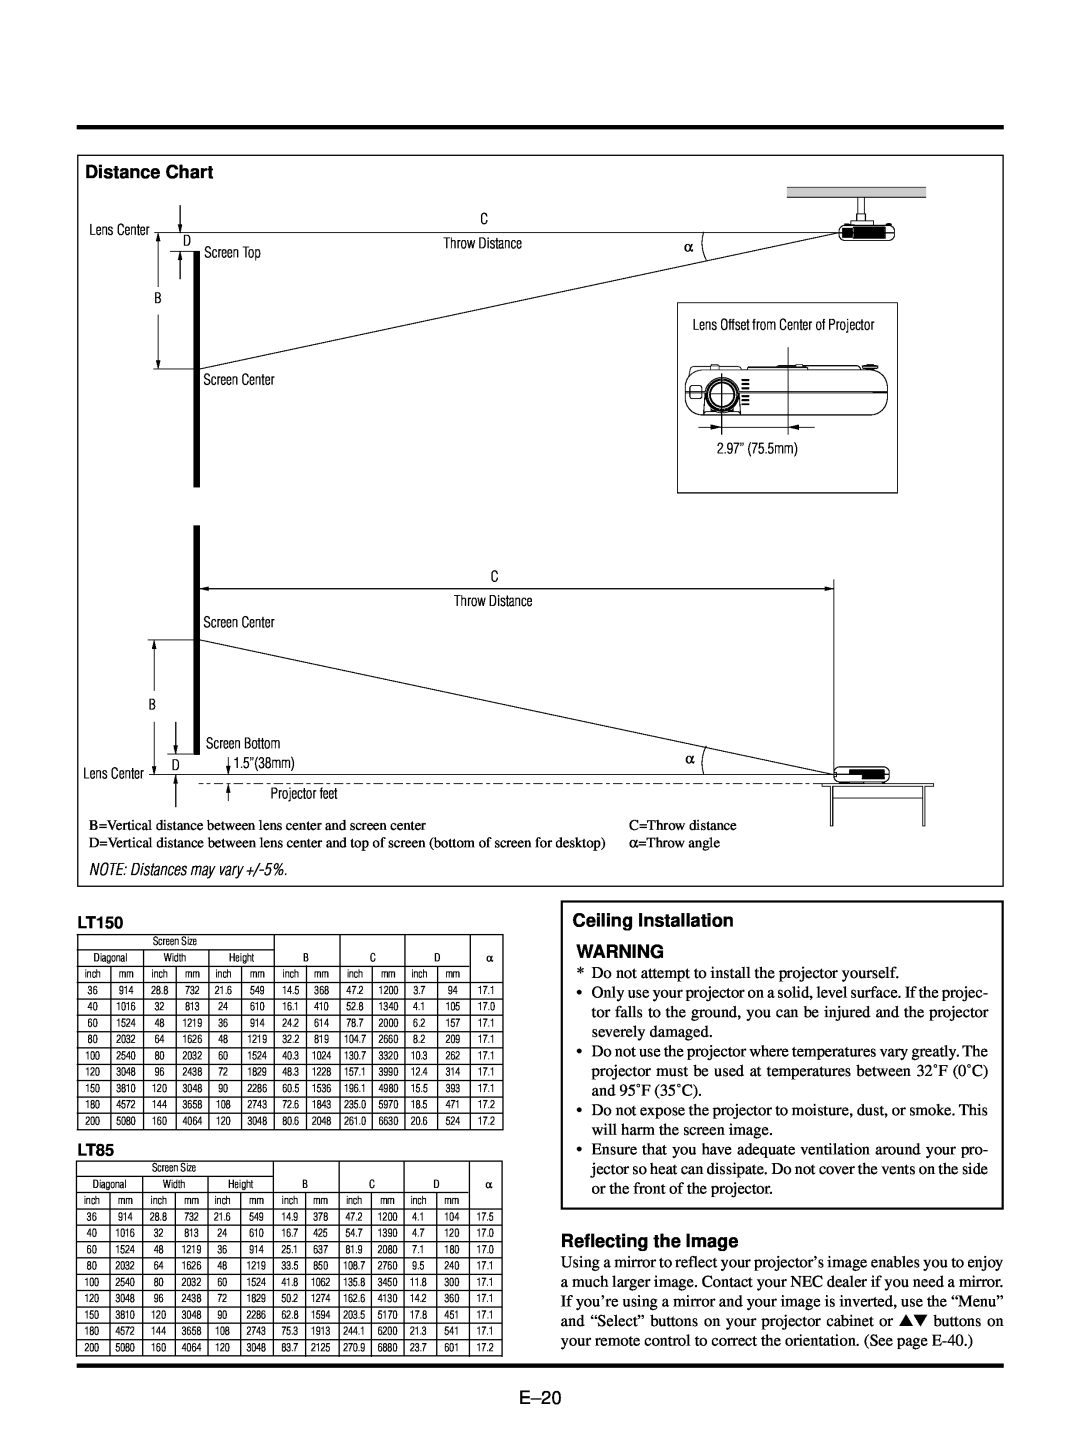 NEC LT150/LT85 user manual Distance Chart, Ceiling Installation, Reflecting the Image, E–20 